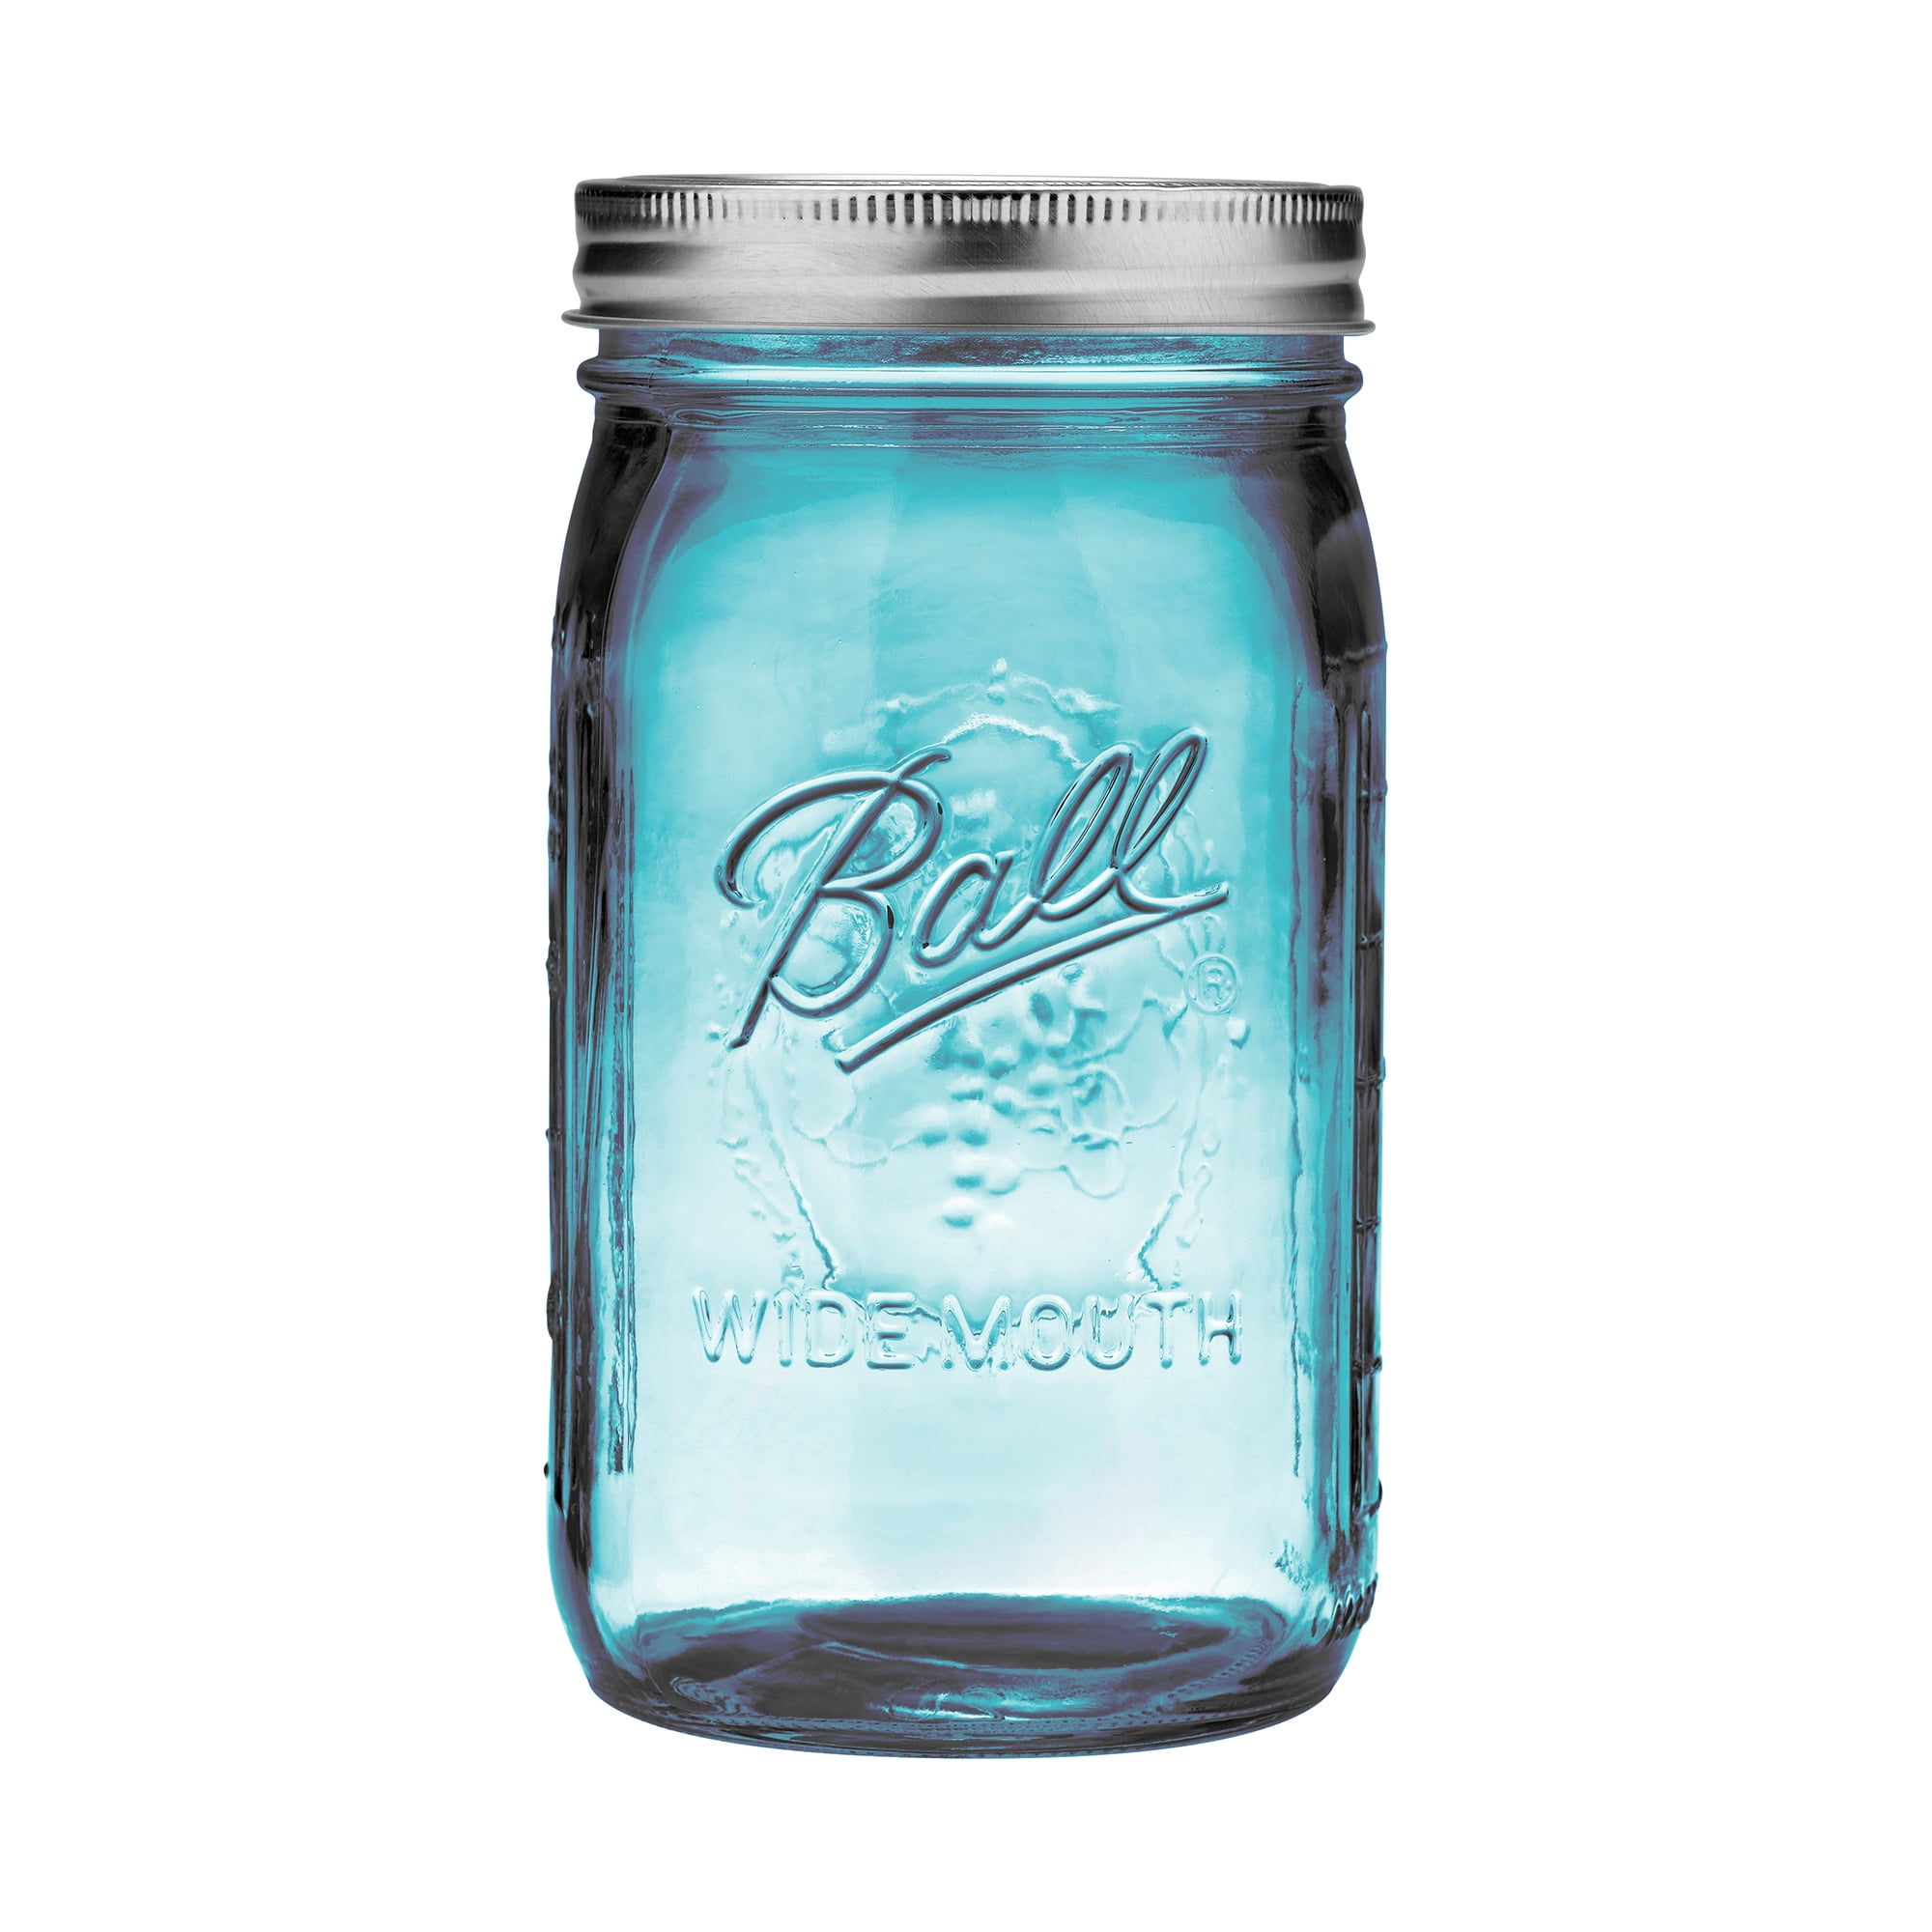 Why are ball mason jars blue in color?